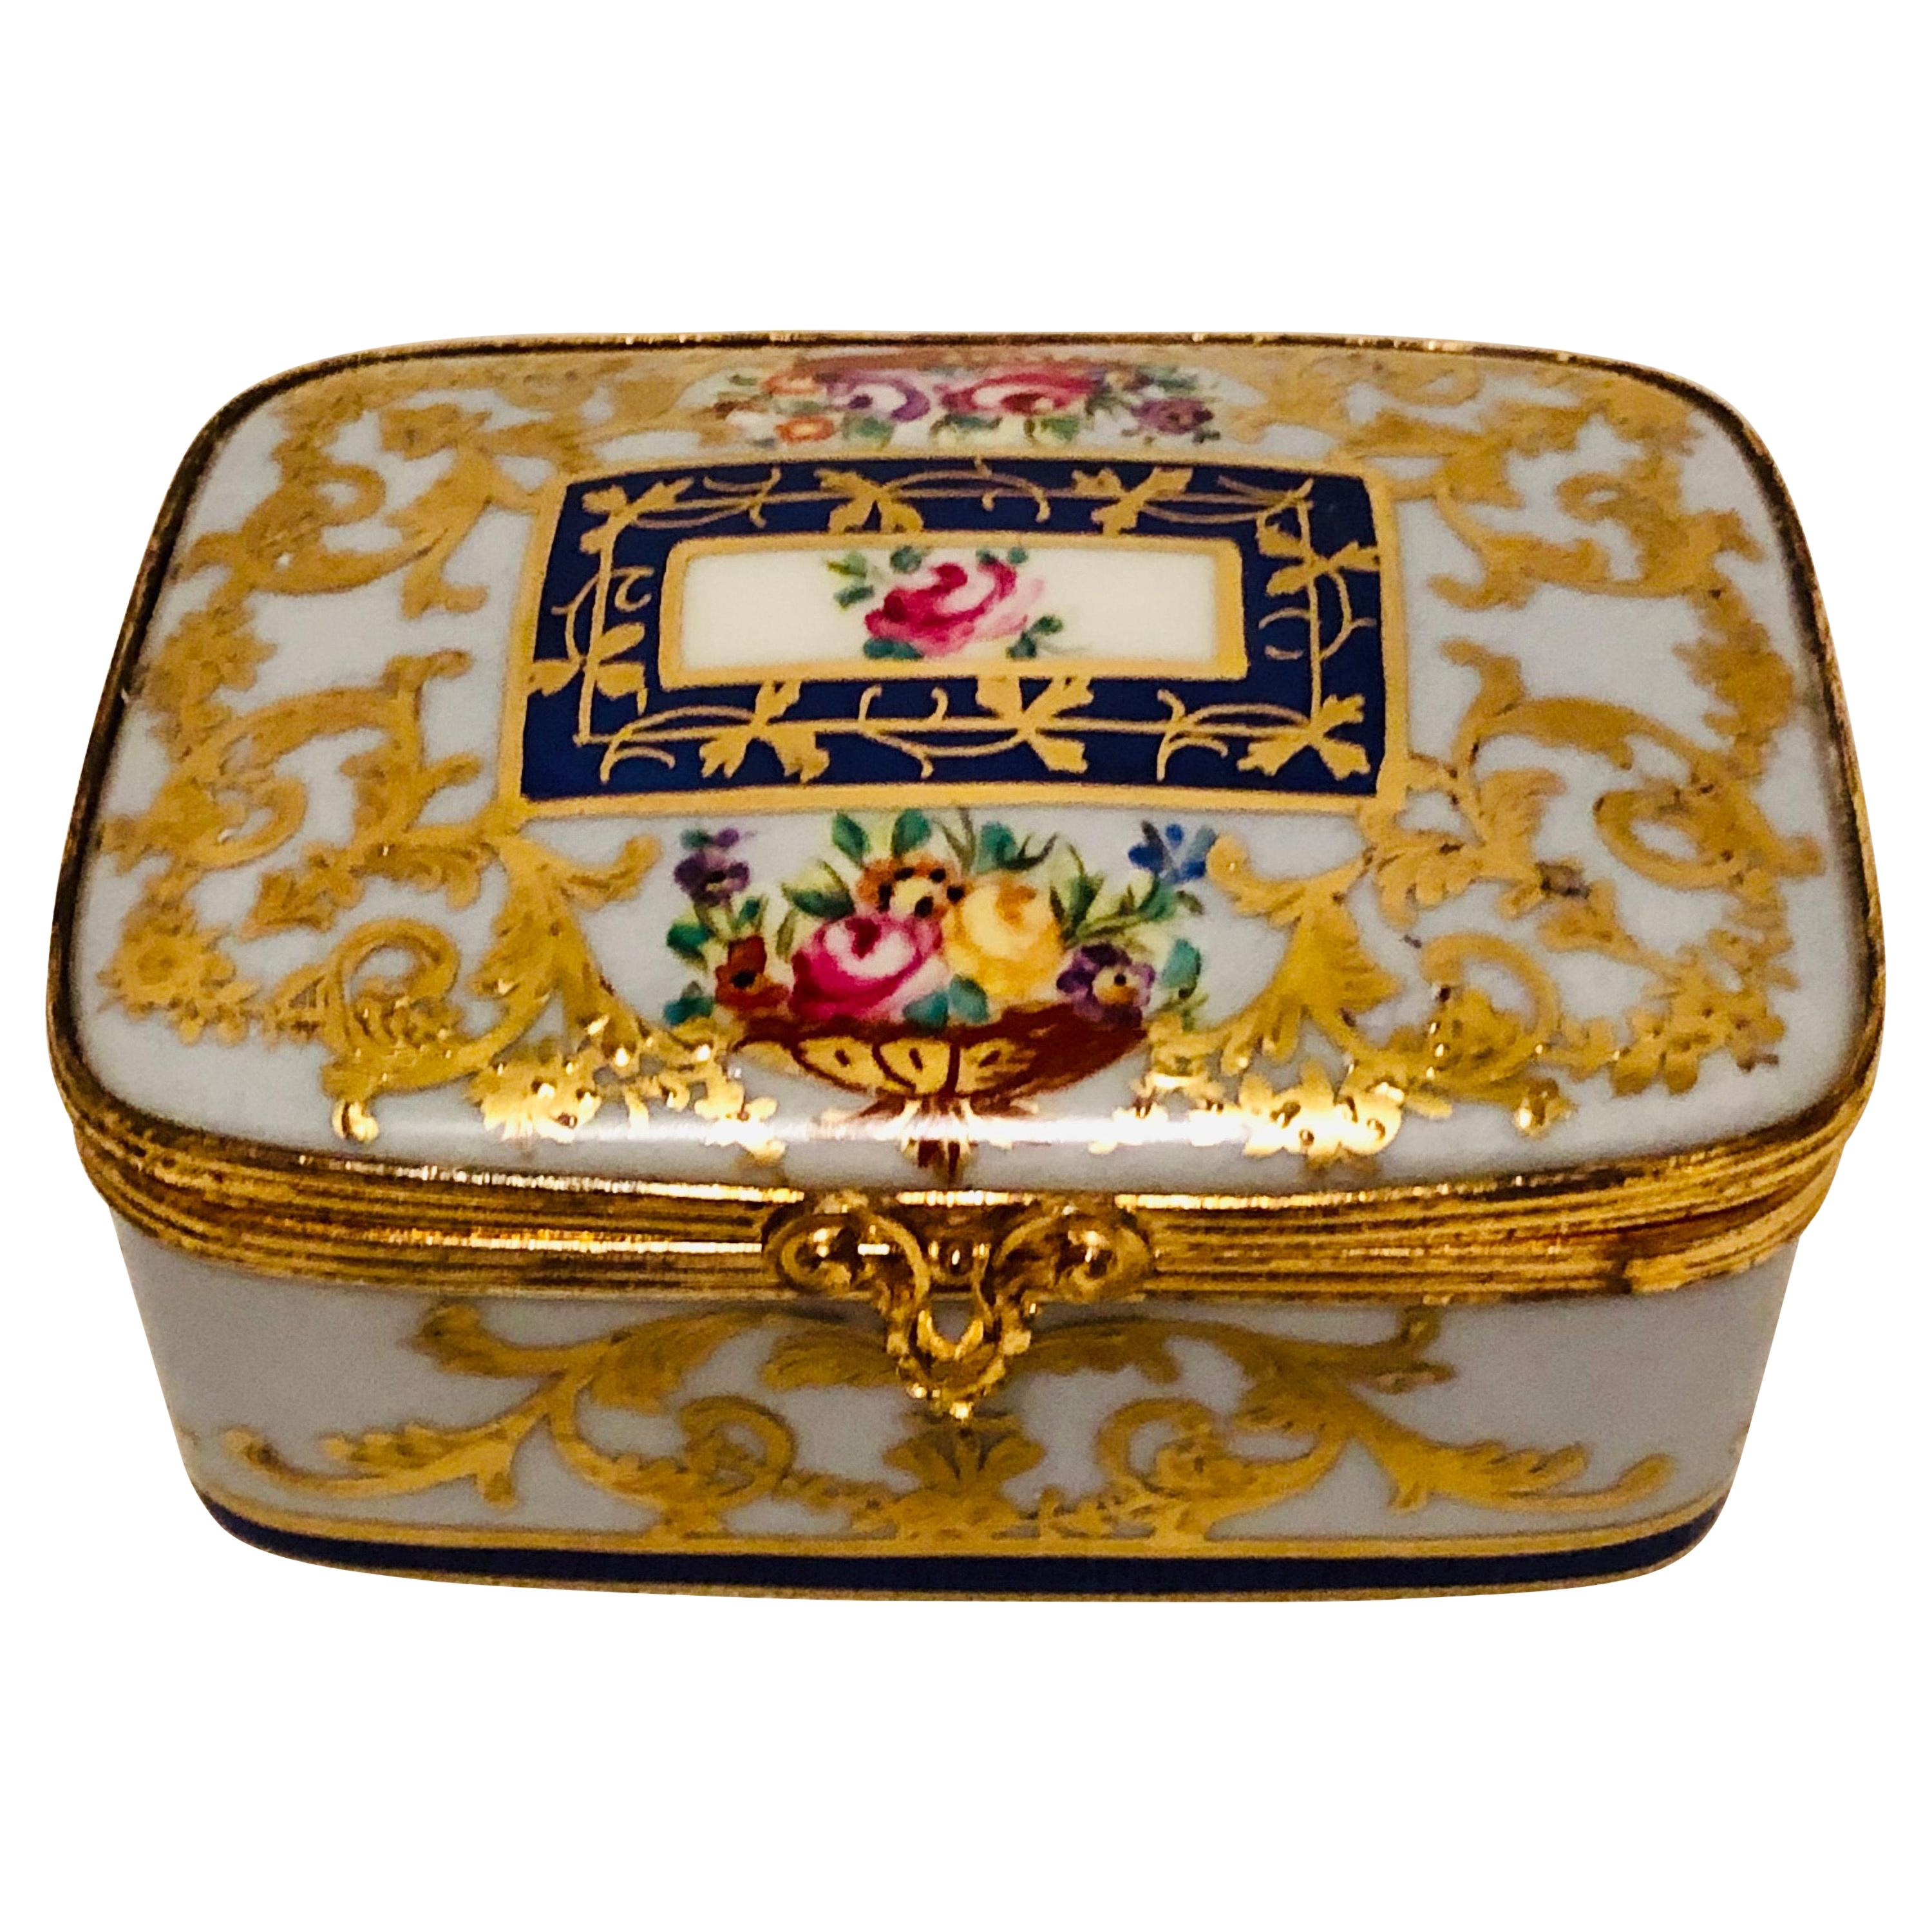 Le Tallec Porcelain Box with Decorated with Flower Bouquets and Raised Gilding